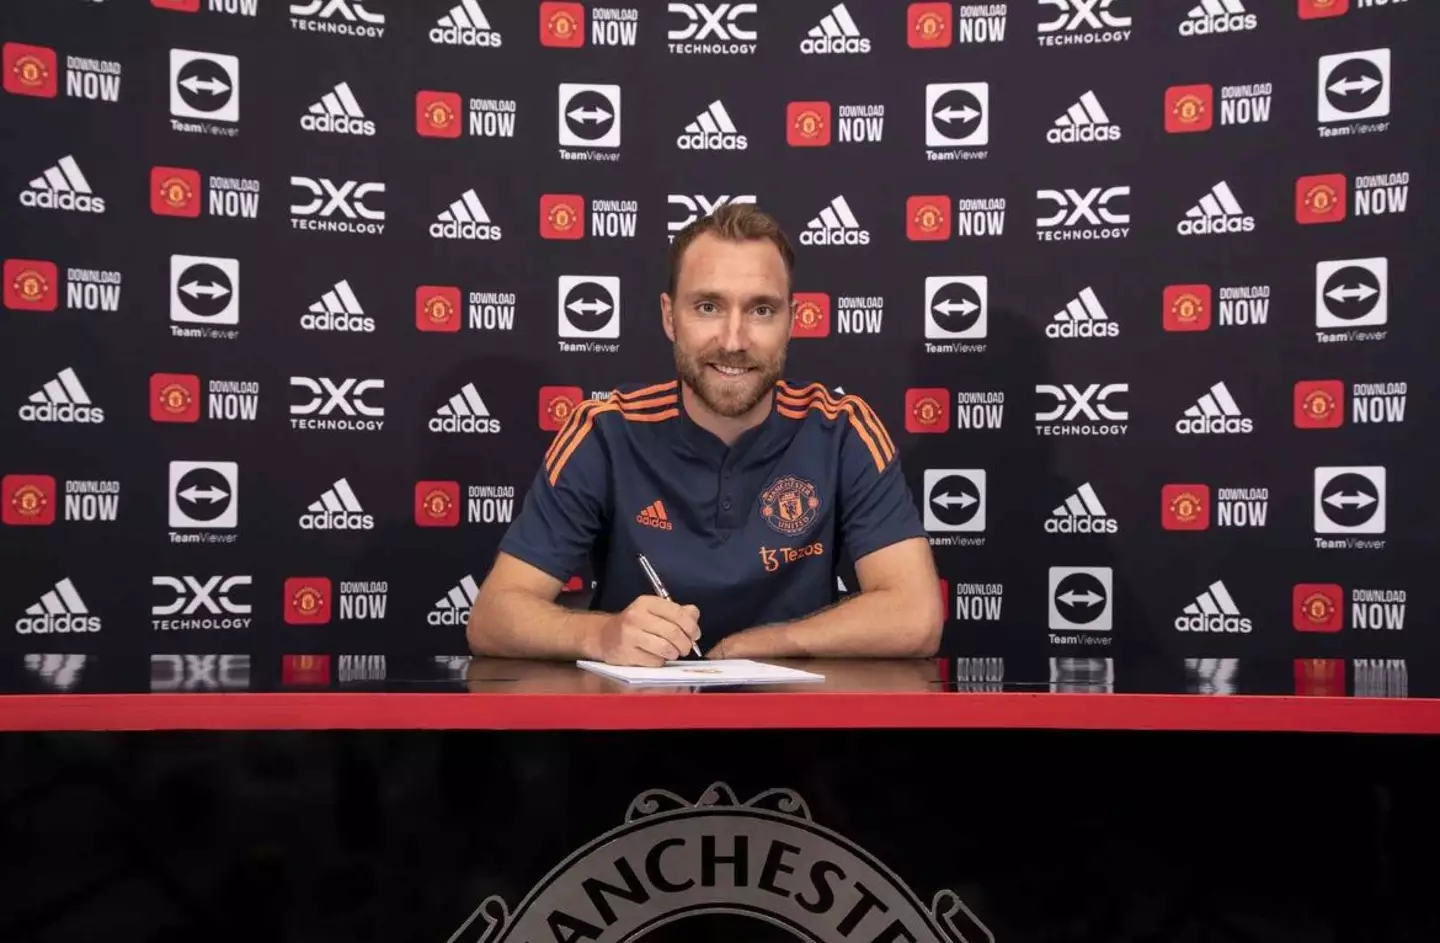 Christian Eriksen has signed a three-year contract with Manchester United. (Man Utd)